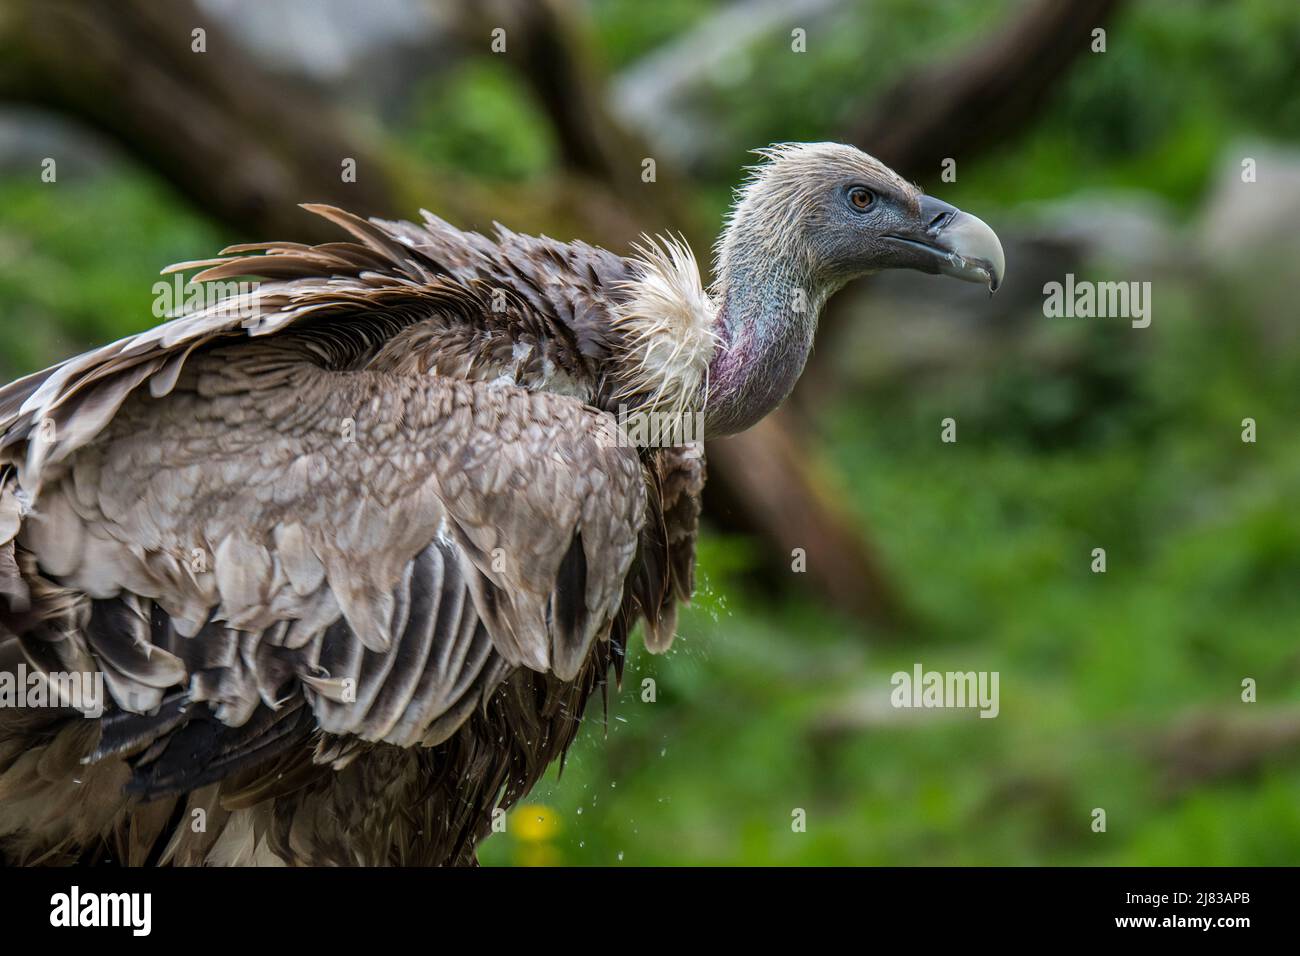 Griffon vulture / Eurasian griffon (Gyps fulvus) scavenger bird native to southern Europe, North Africa and Asia Stock Photo